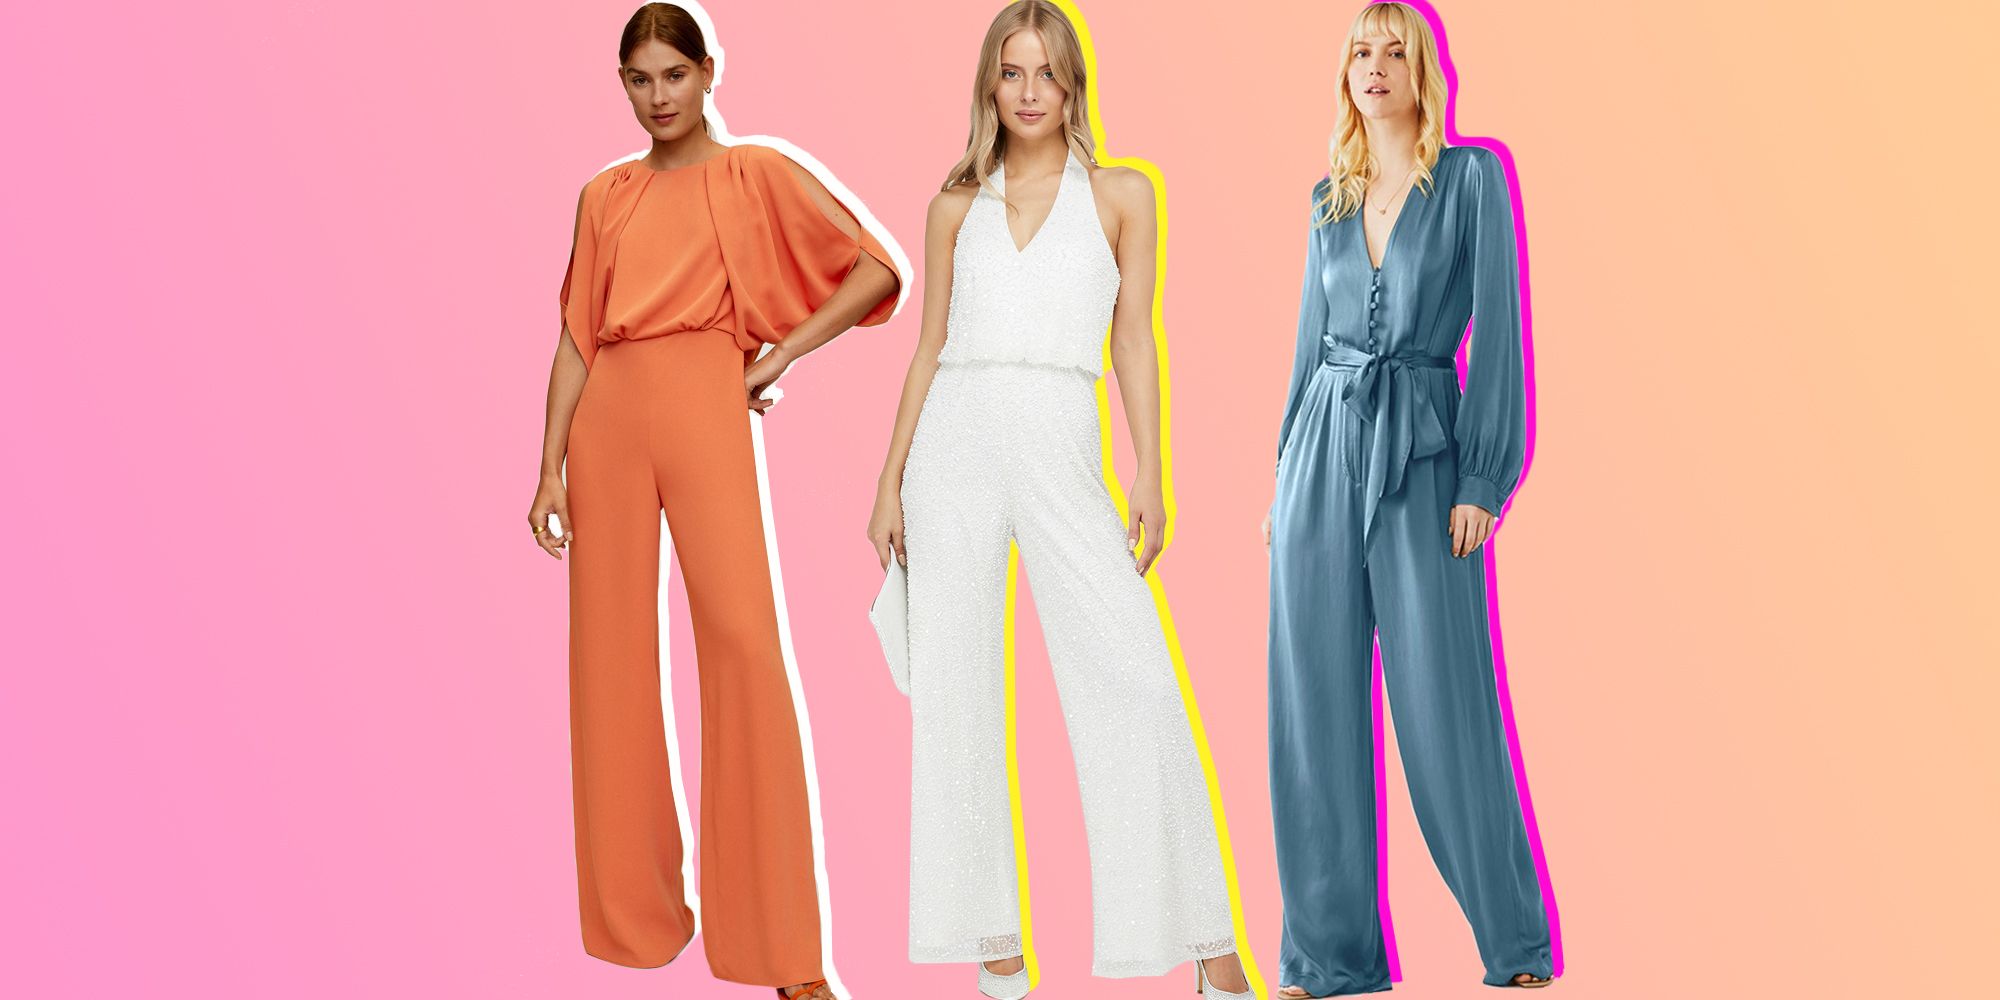 jumpsuits for wedding guests uk